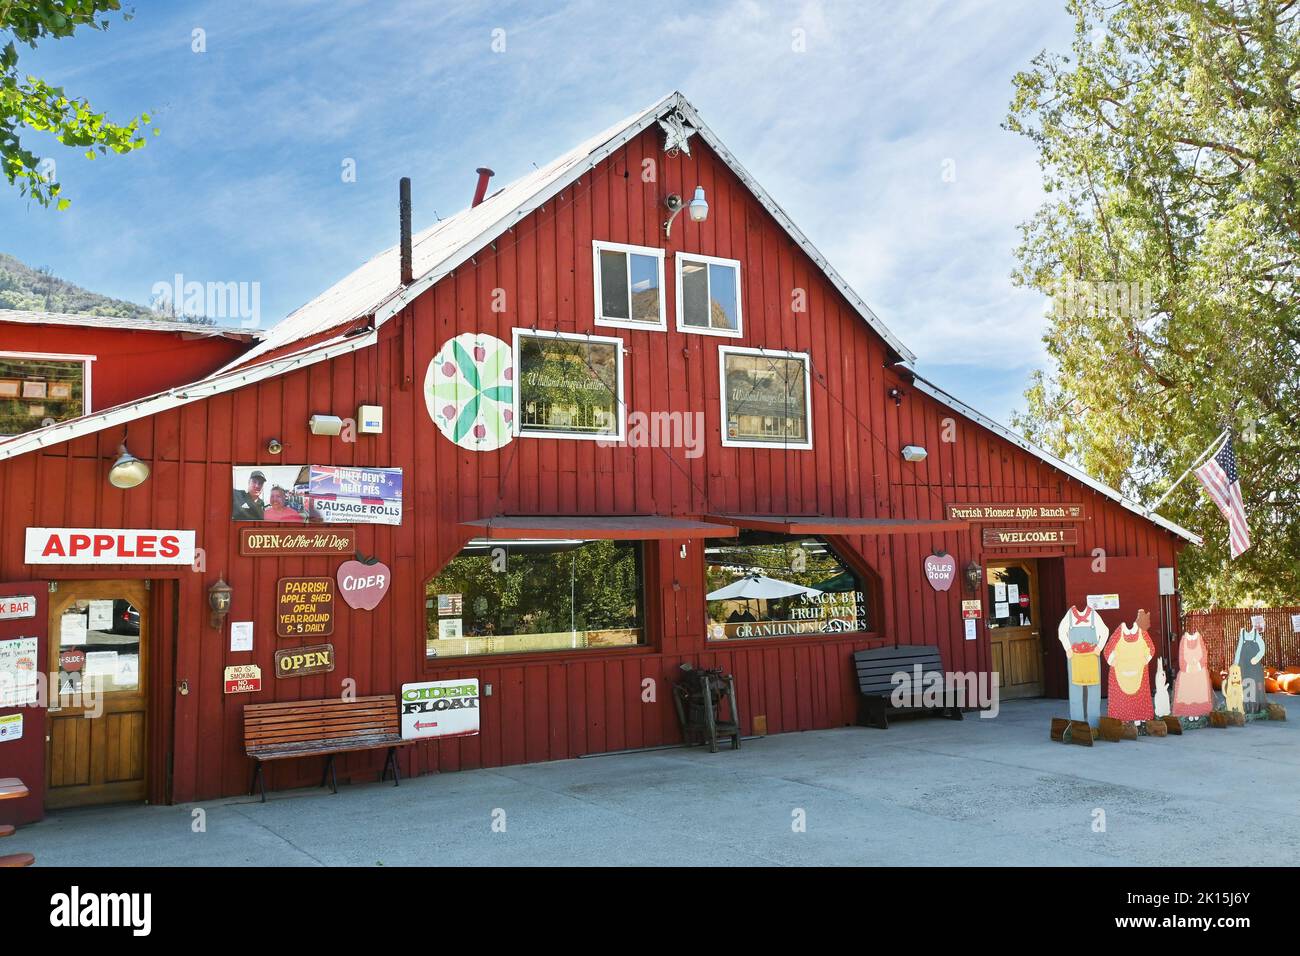 OAK GLEN, CALIFORNIA - 10 OCT 2021: Parrish Pioneer Ranch offers Apples, Apple Butter, Apple Cider, Refreshment Counter, Gourmet Chocolates and Candy, Stock Photo